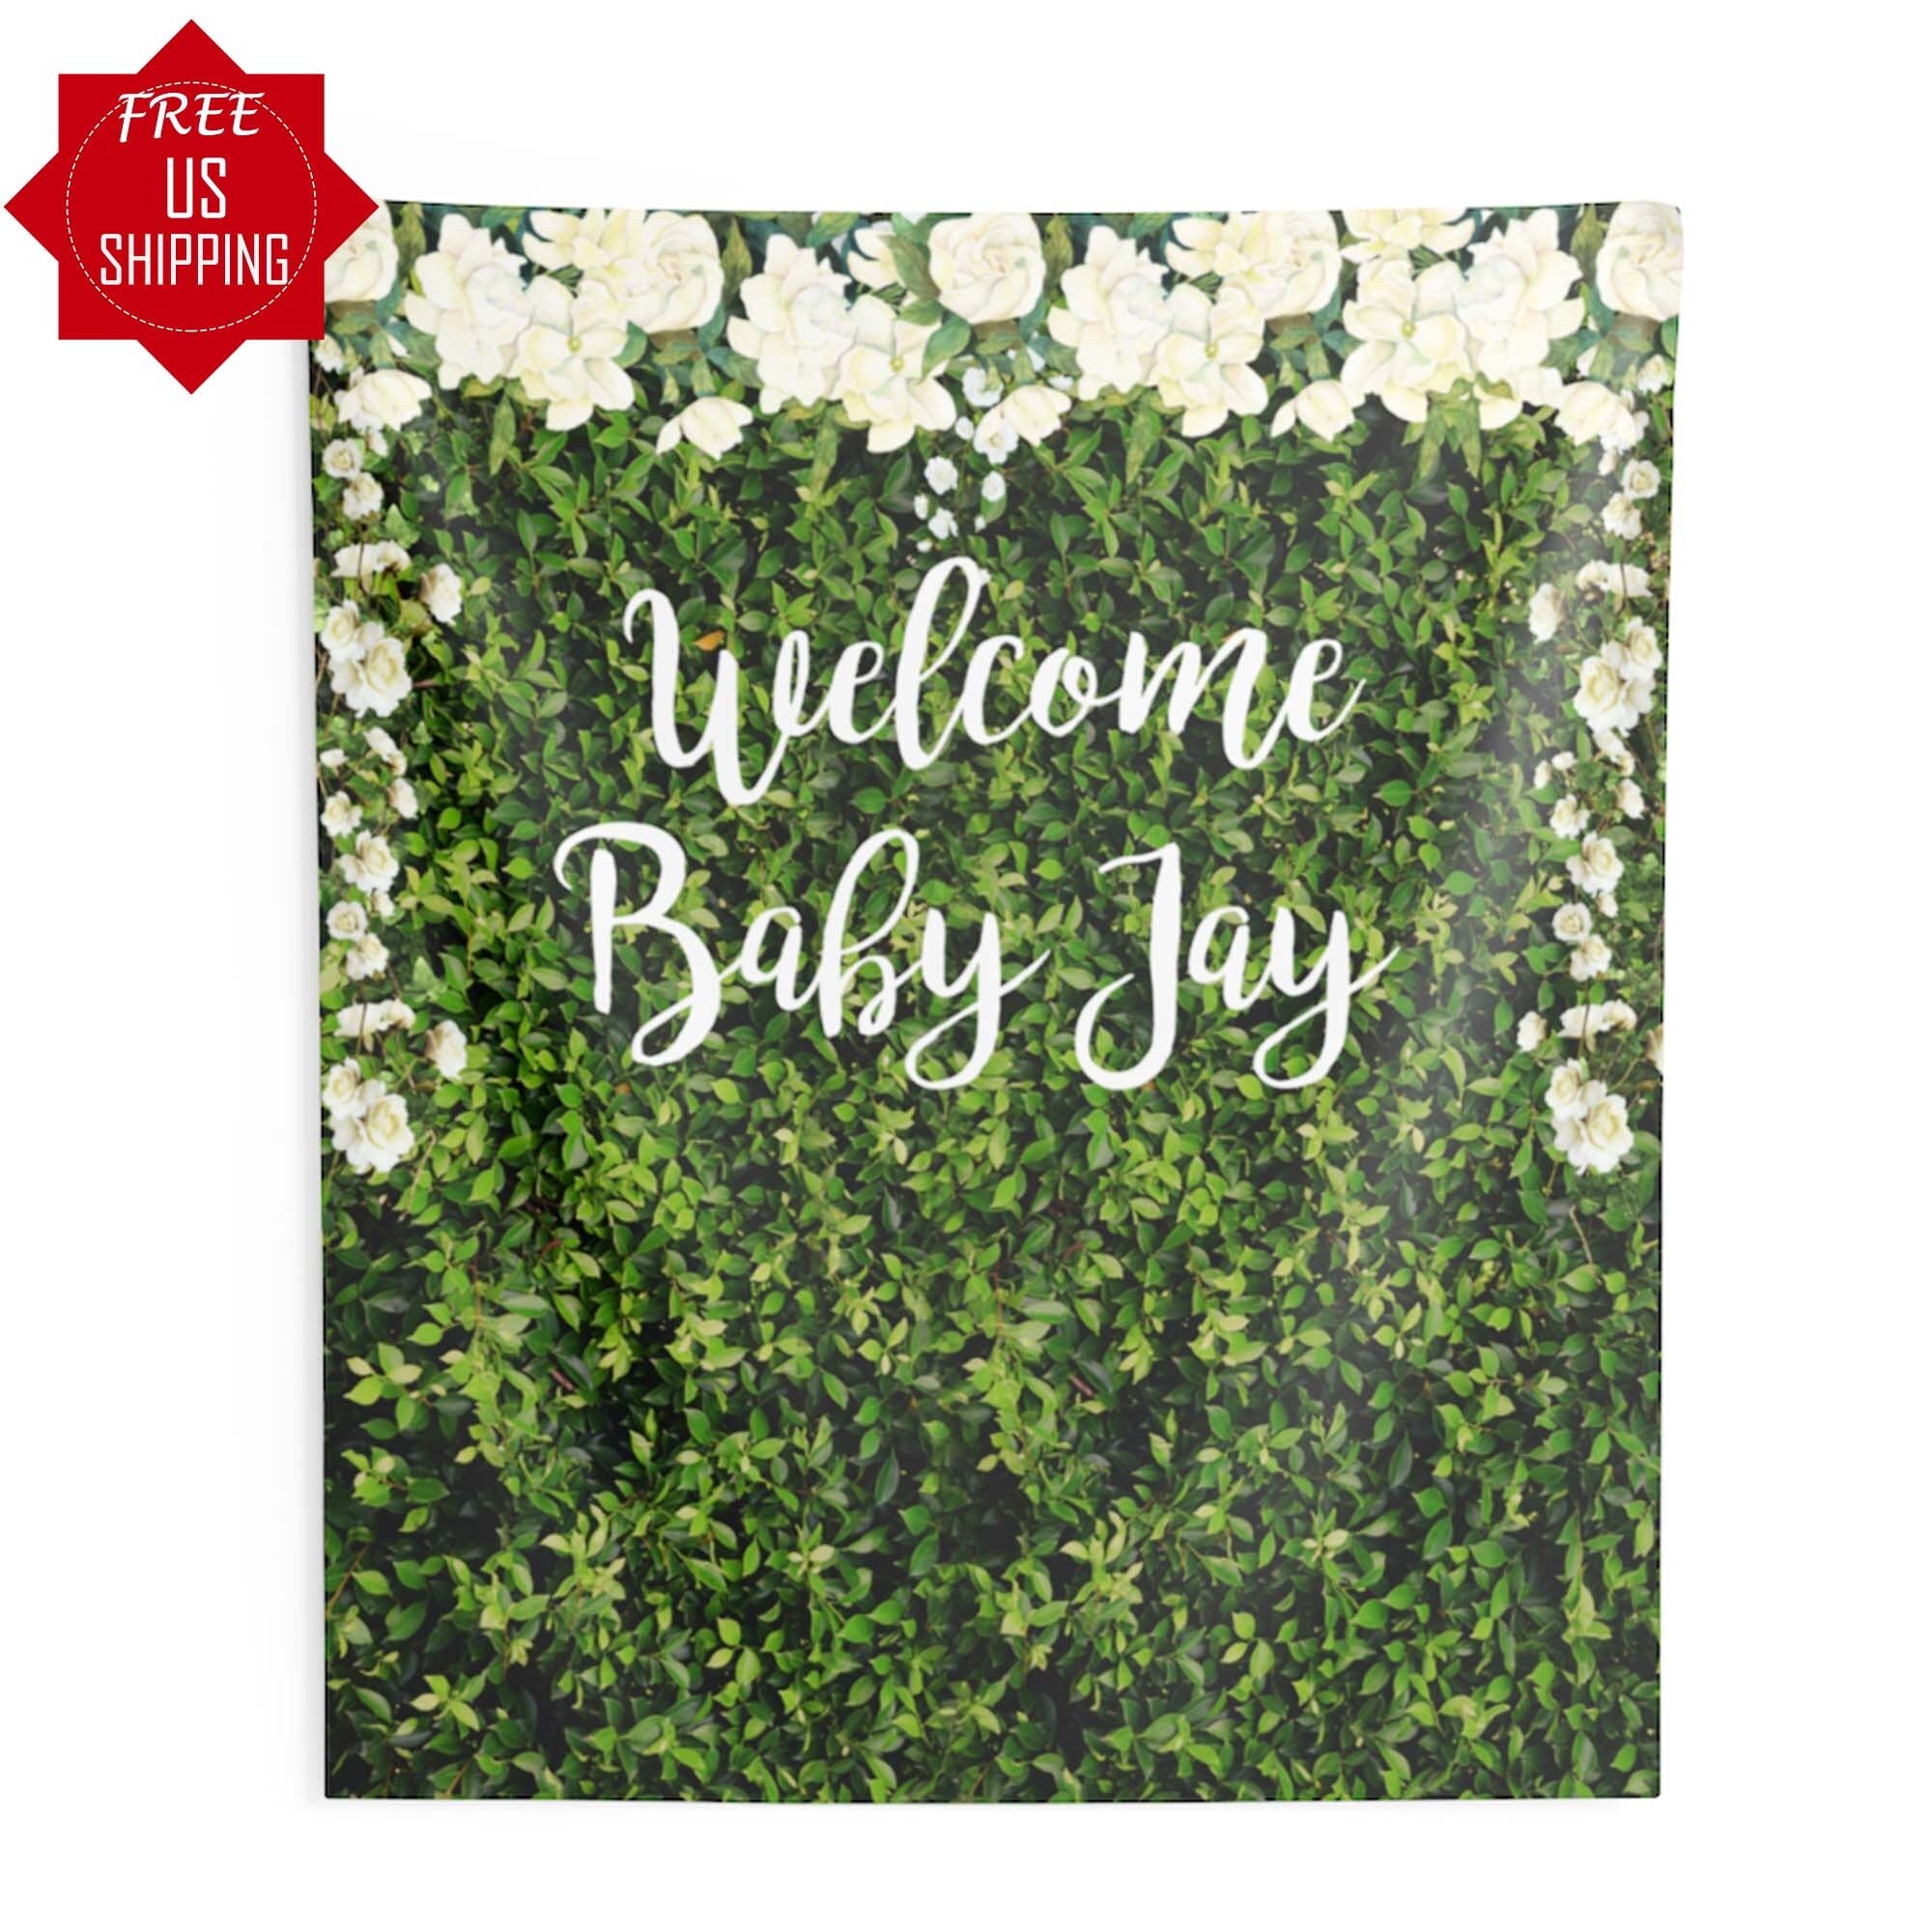 Artificial Grass Wall/ Hedge Wall Floral Baby Shower Photo booth Backdrop / 3D Grass wall grass backdrop/ Custom Banner